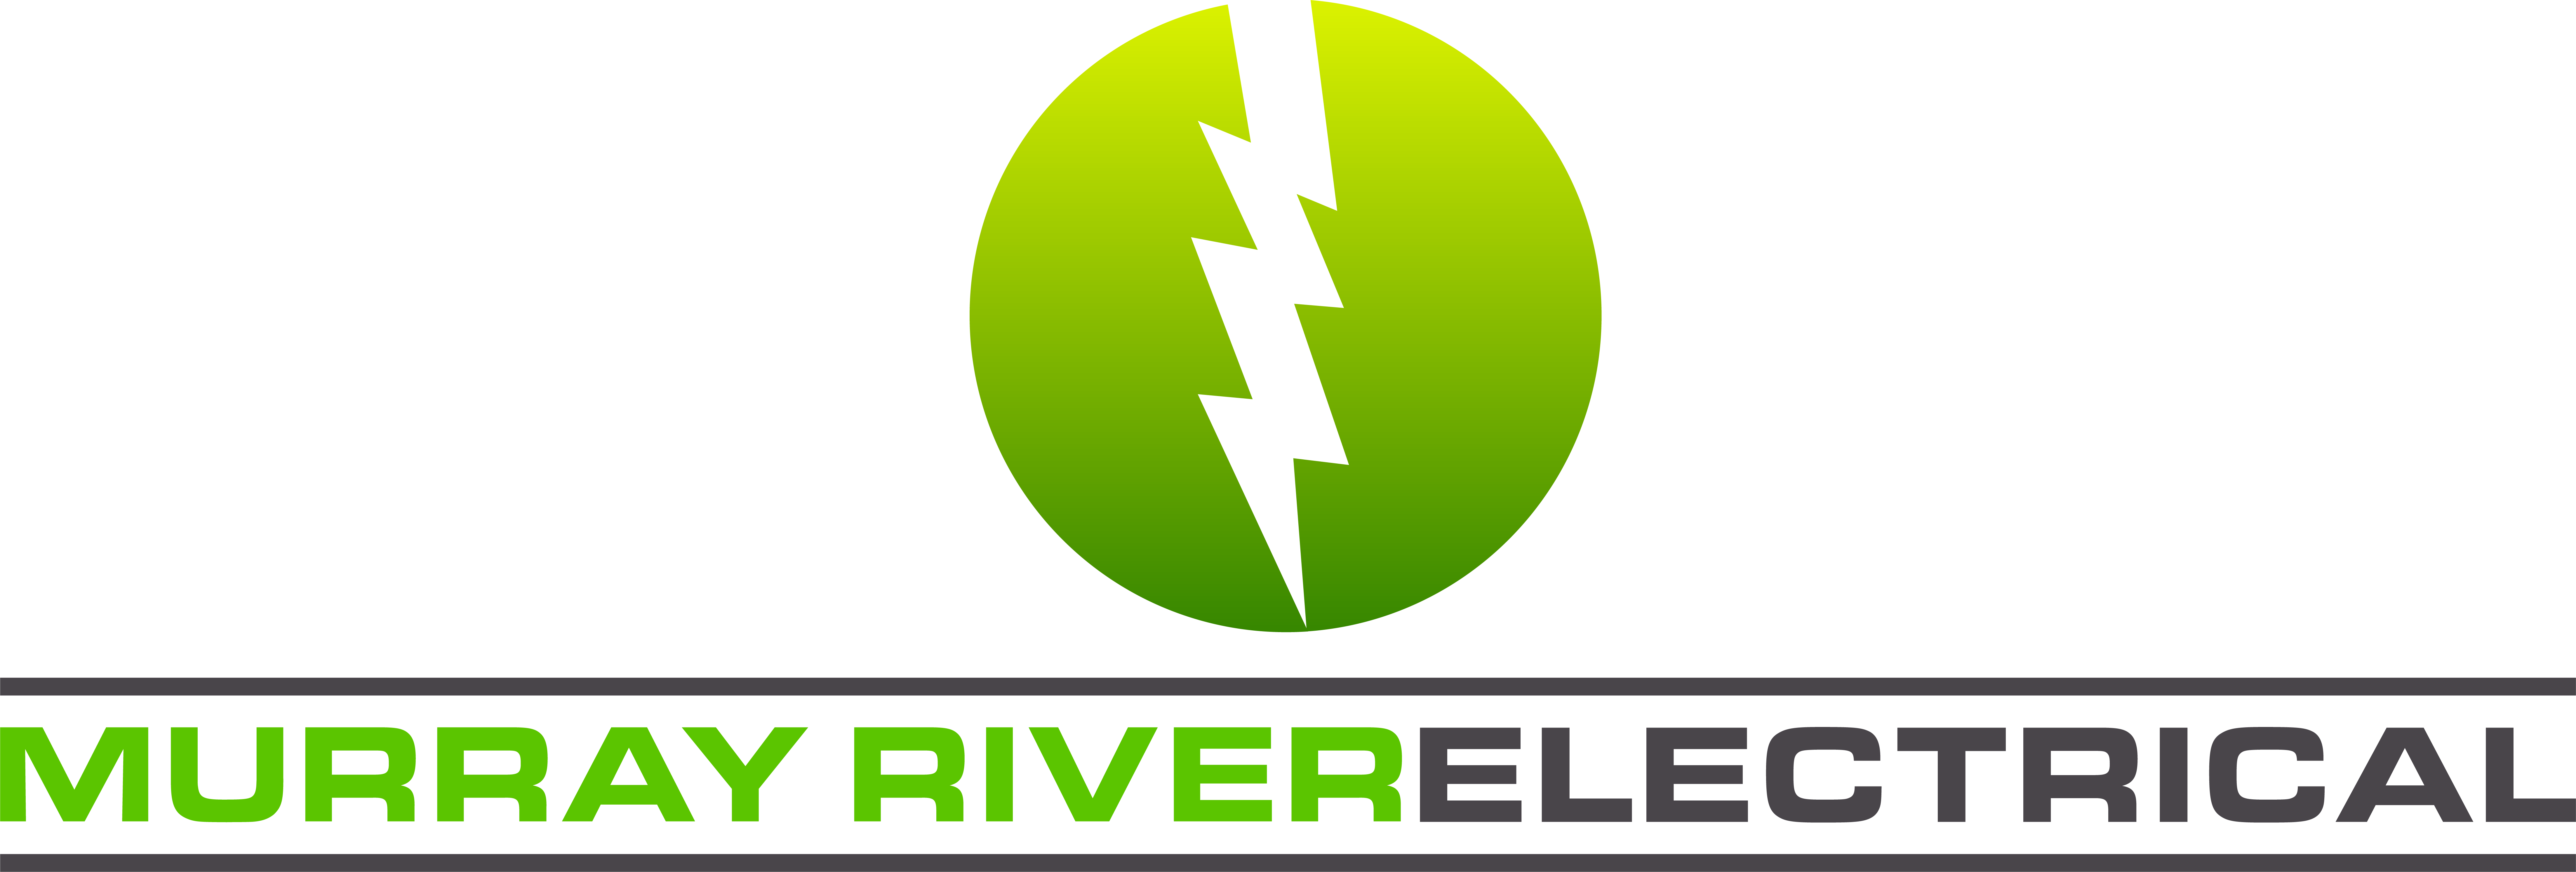 Murray River Electrical